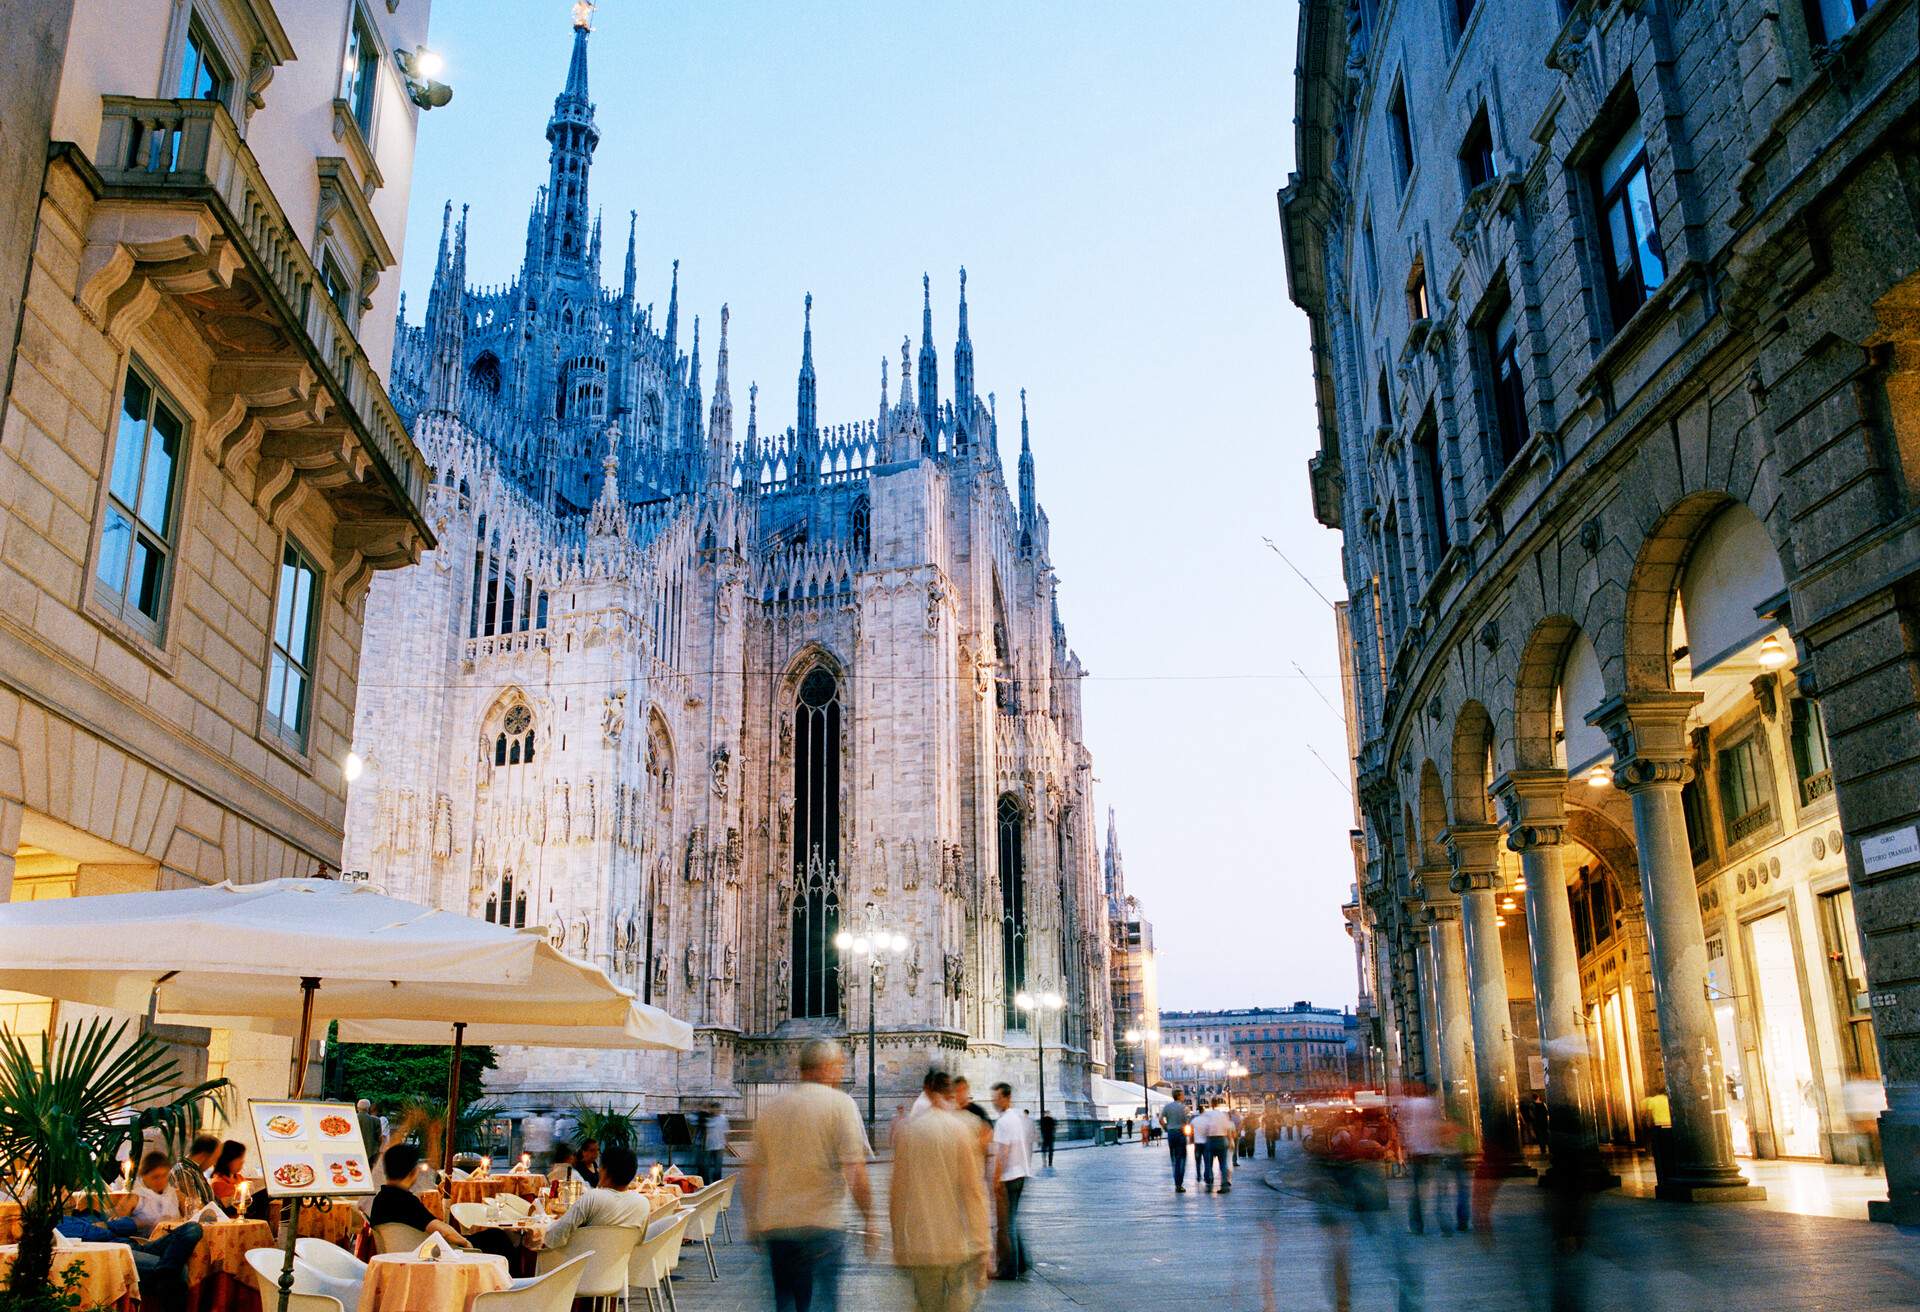 Italy, Lombardy, Milan, Piazza del Duomo, people dining and walking along busy street lined with bars and restaurants in twilight